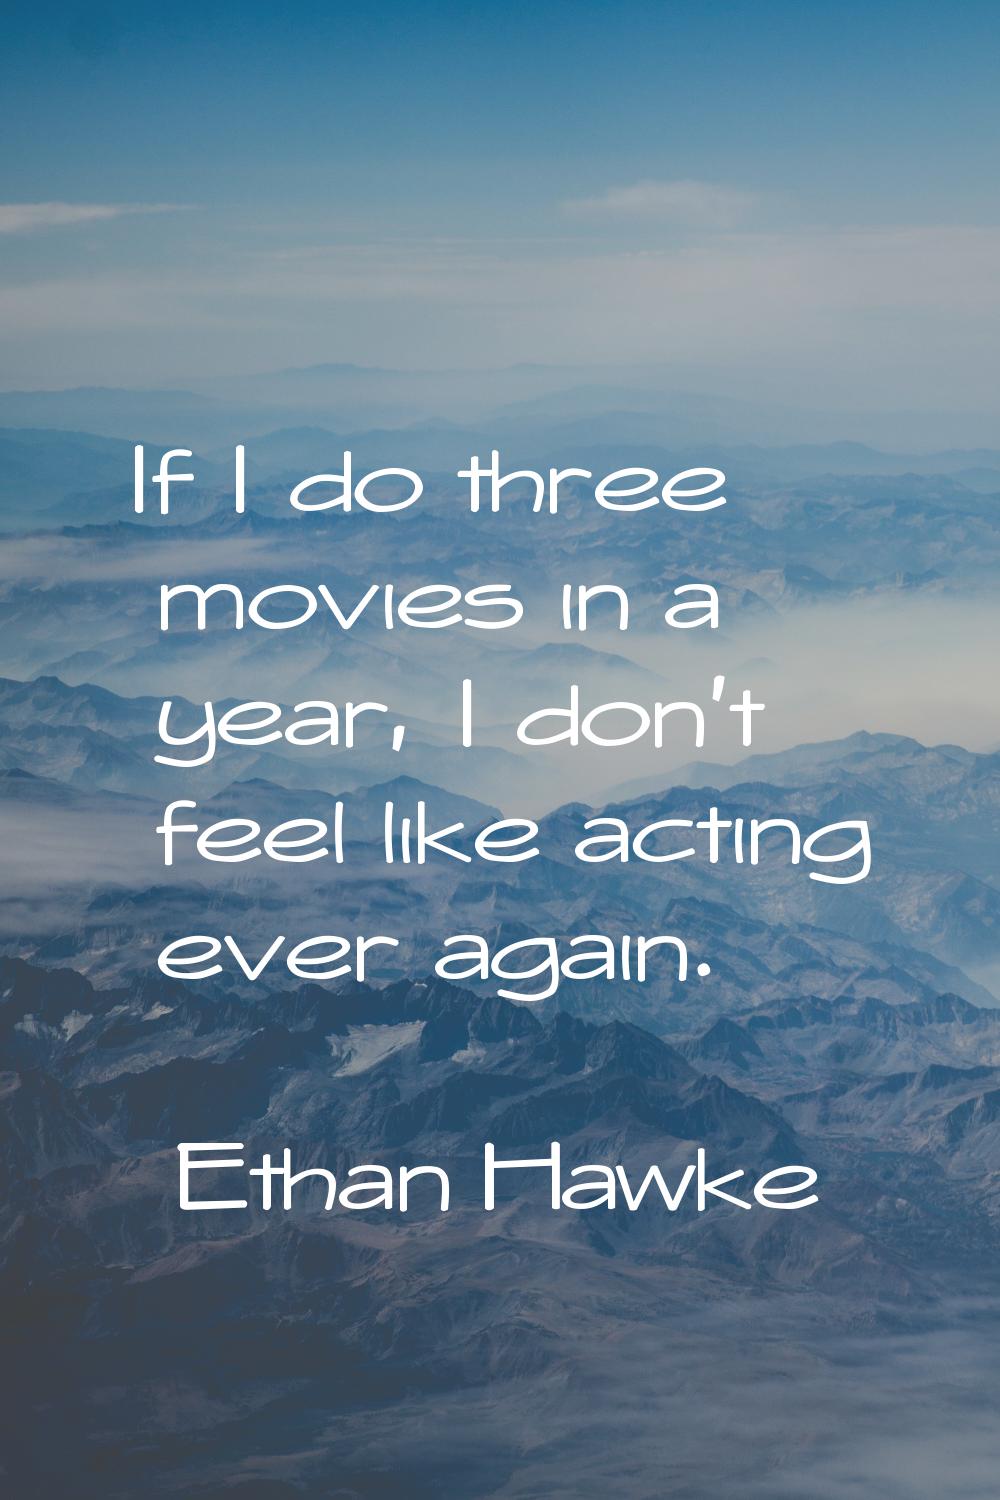 If I do three movies in a year, I don't feel like acting ever again.